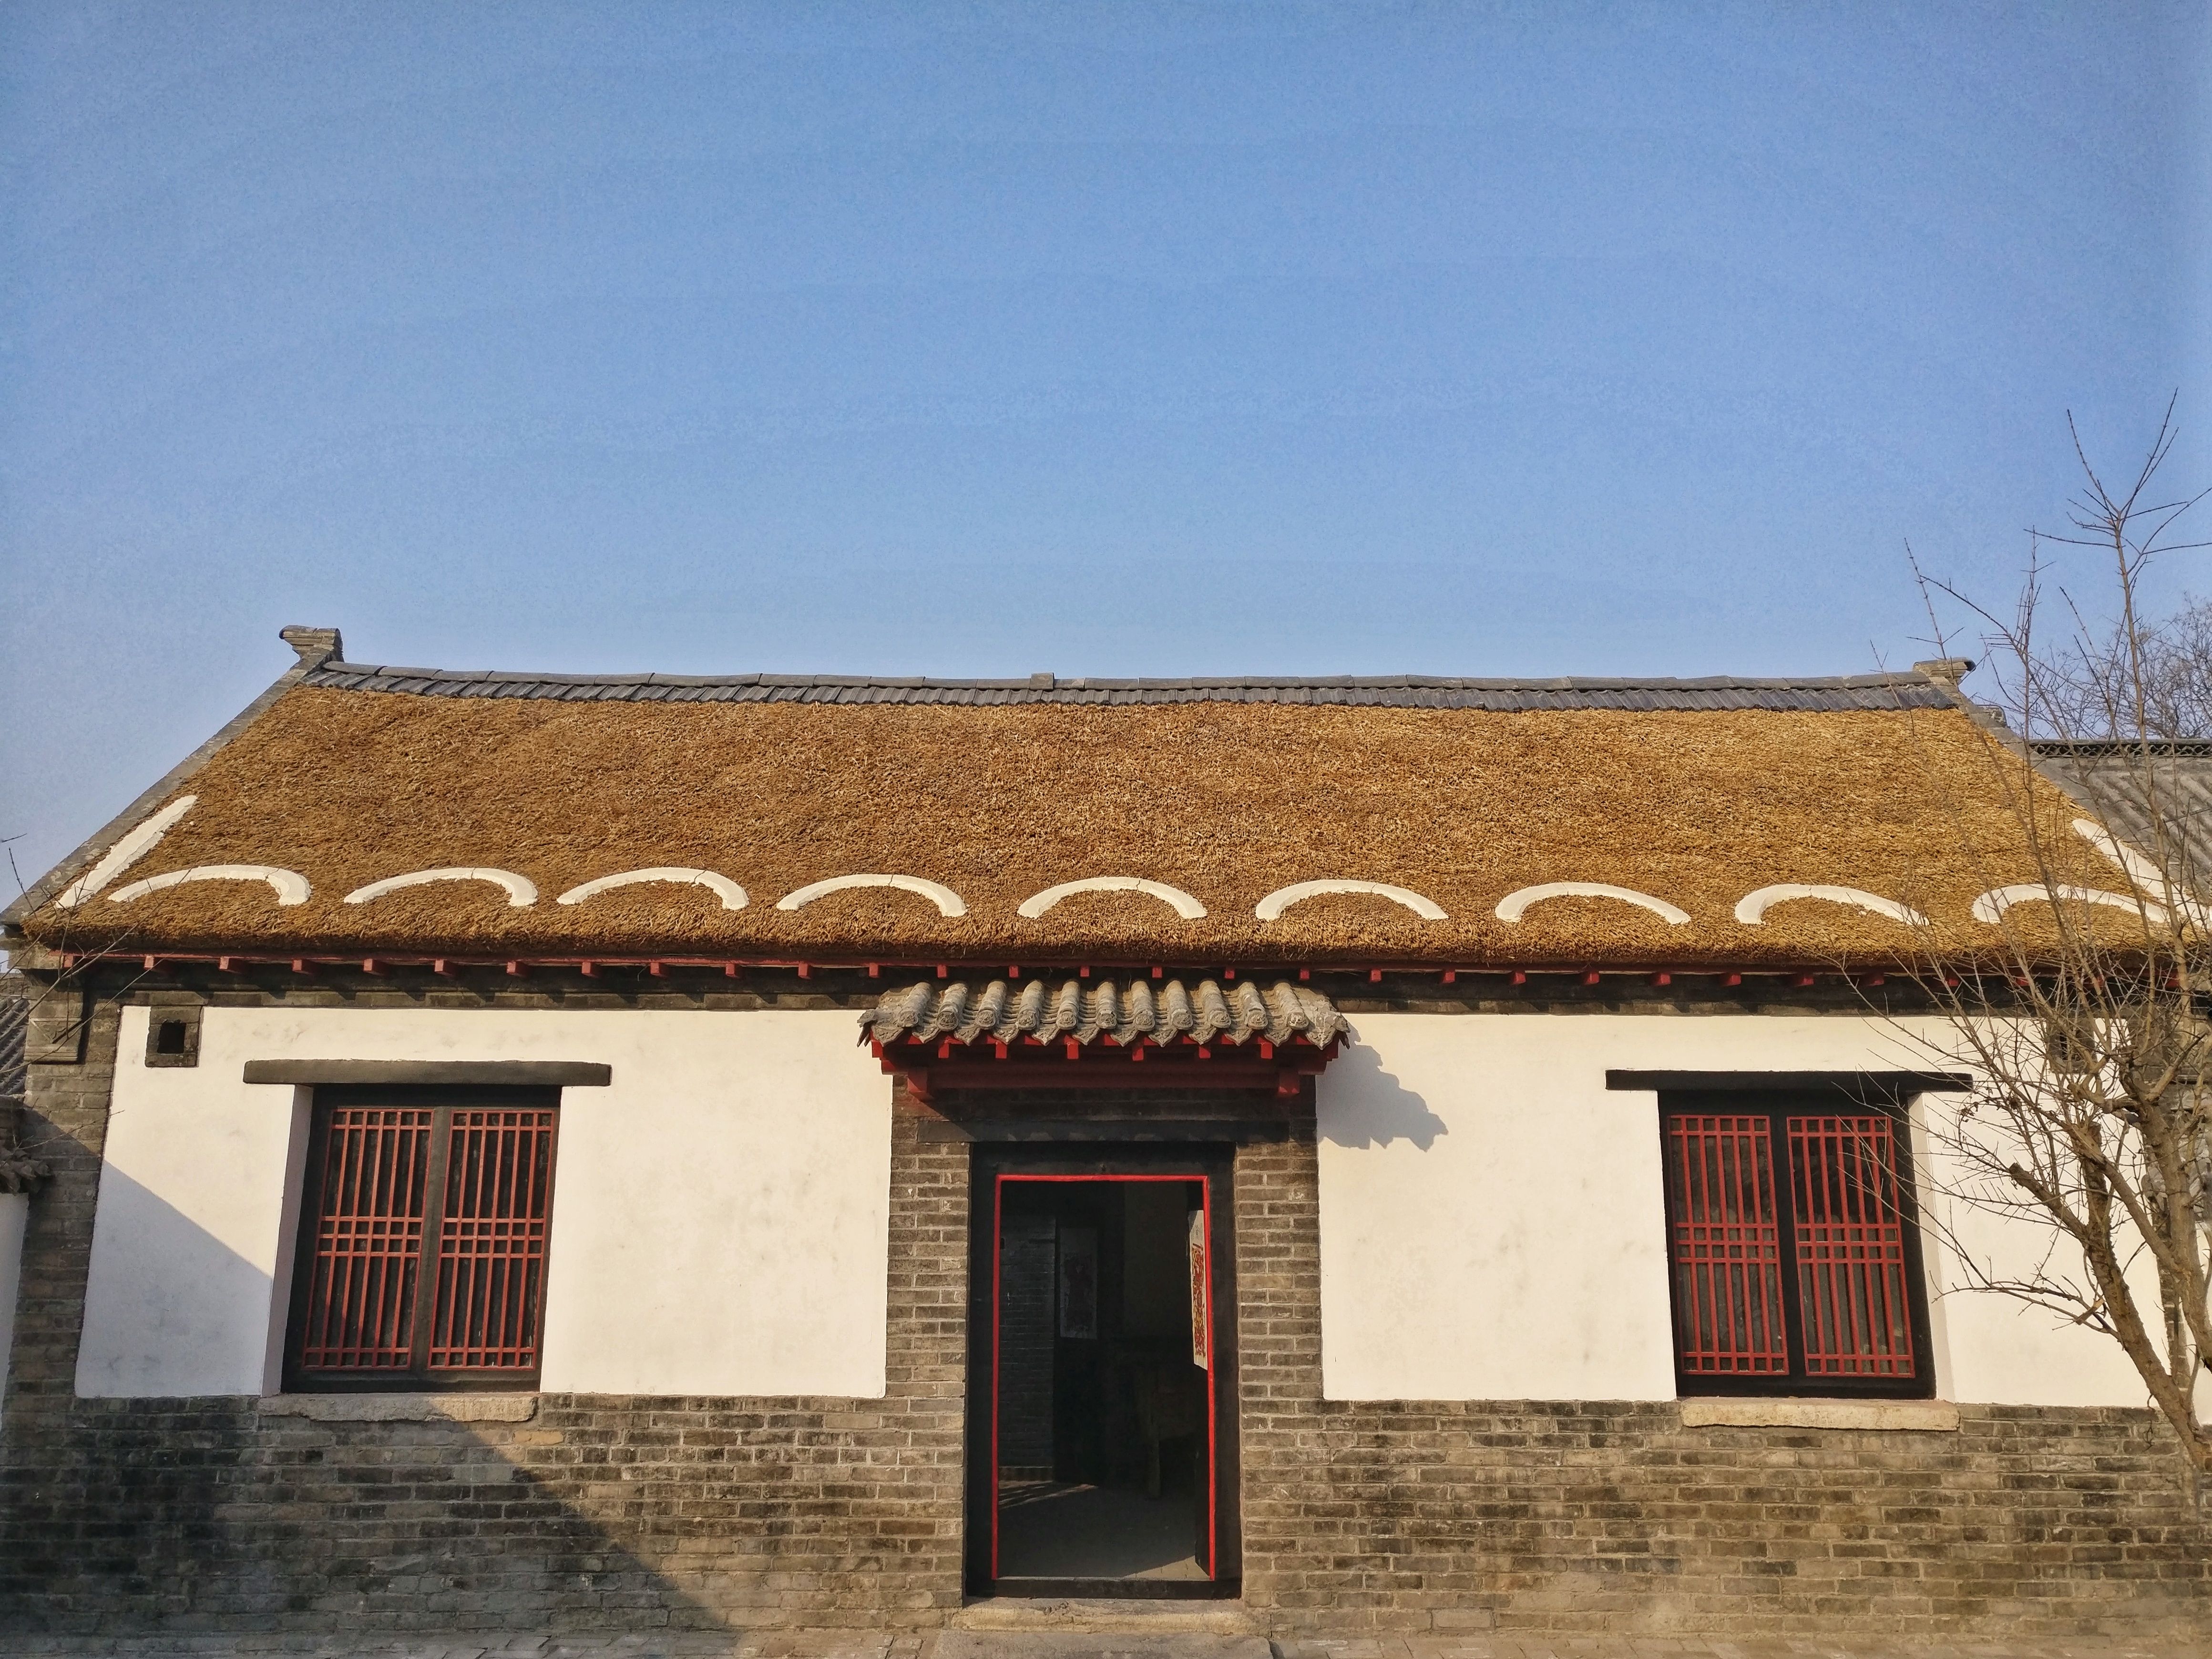 Interesting grass rooftop of Chinese old building 古建筑茅草屋顶